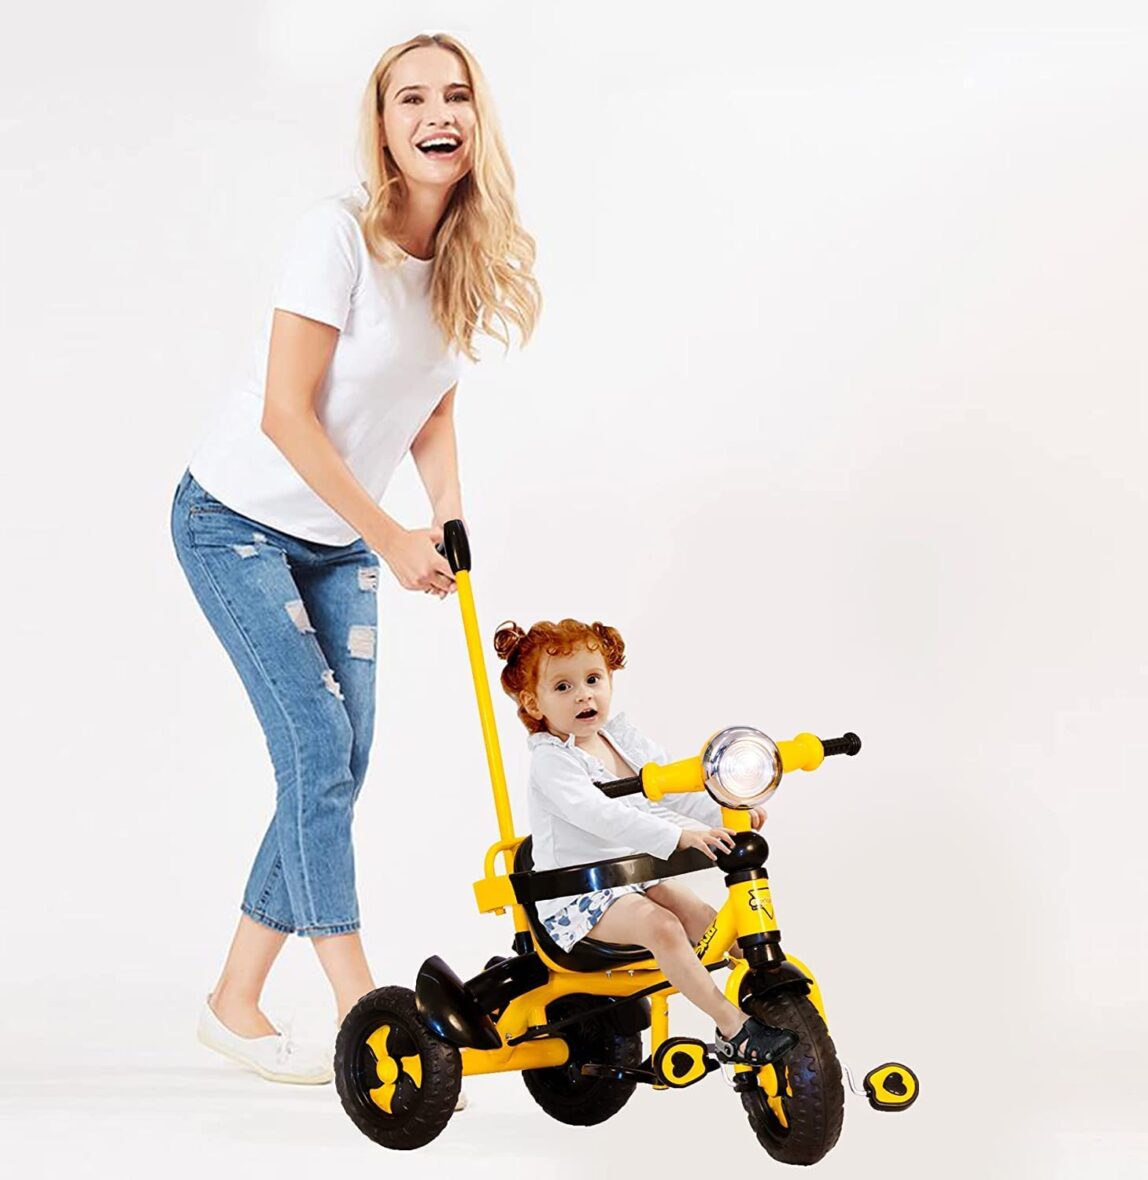 U Smile Kids Tricycle with Parent Control Handle and Kids Safety Guard & Foot Resting Pads, Trikes for Baby boy or Baby Girl or Toddler Tricycle for 1-5 Years Kids (Pack of 1) (Tricycle Yellow)